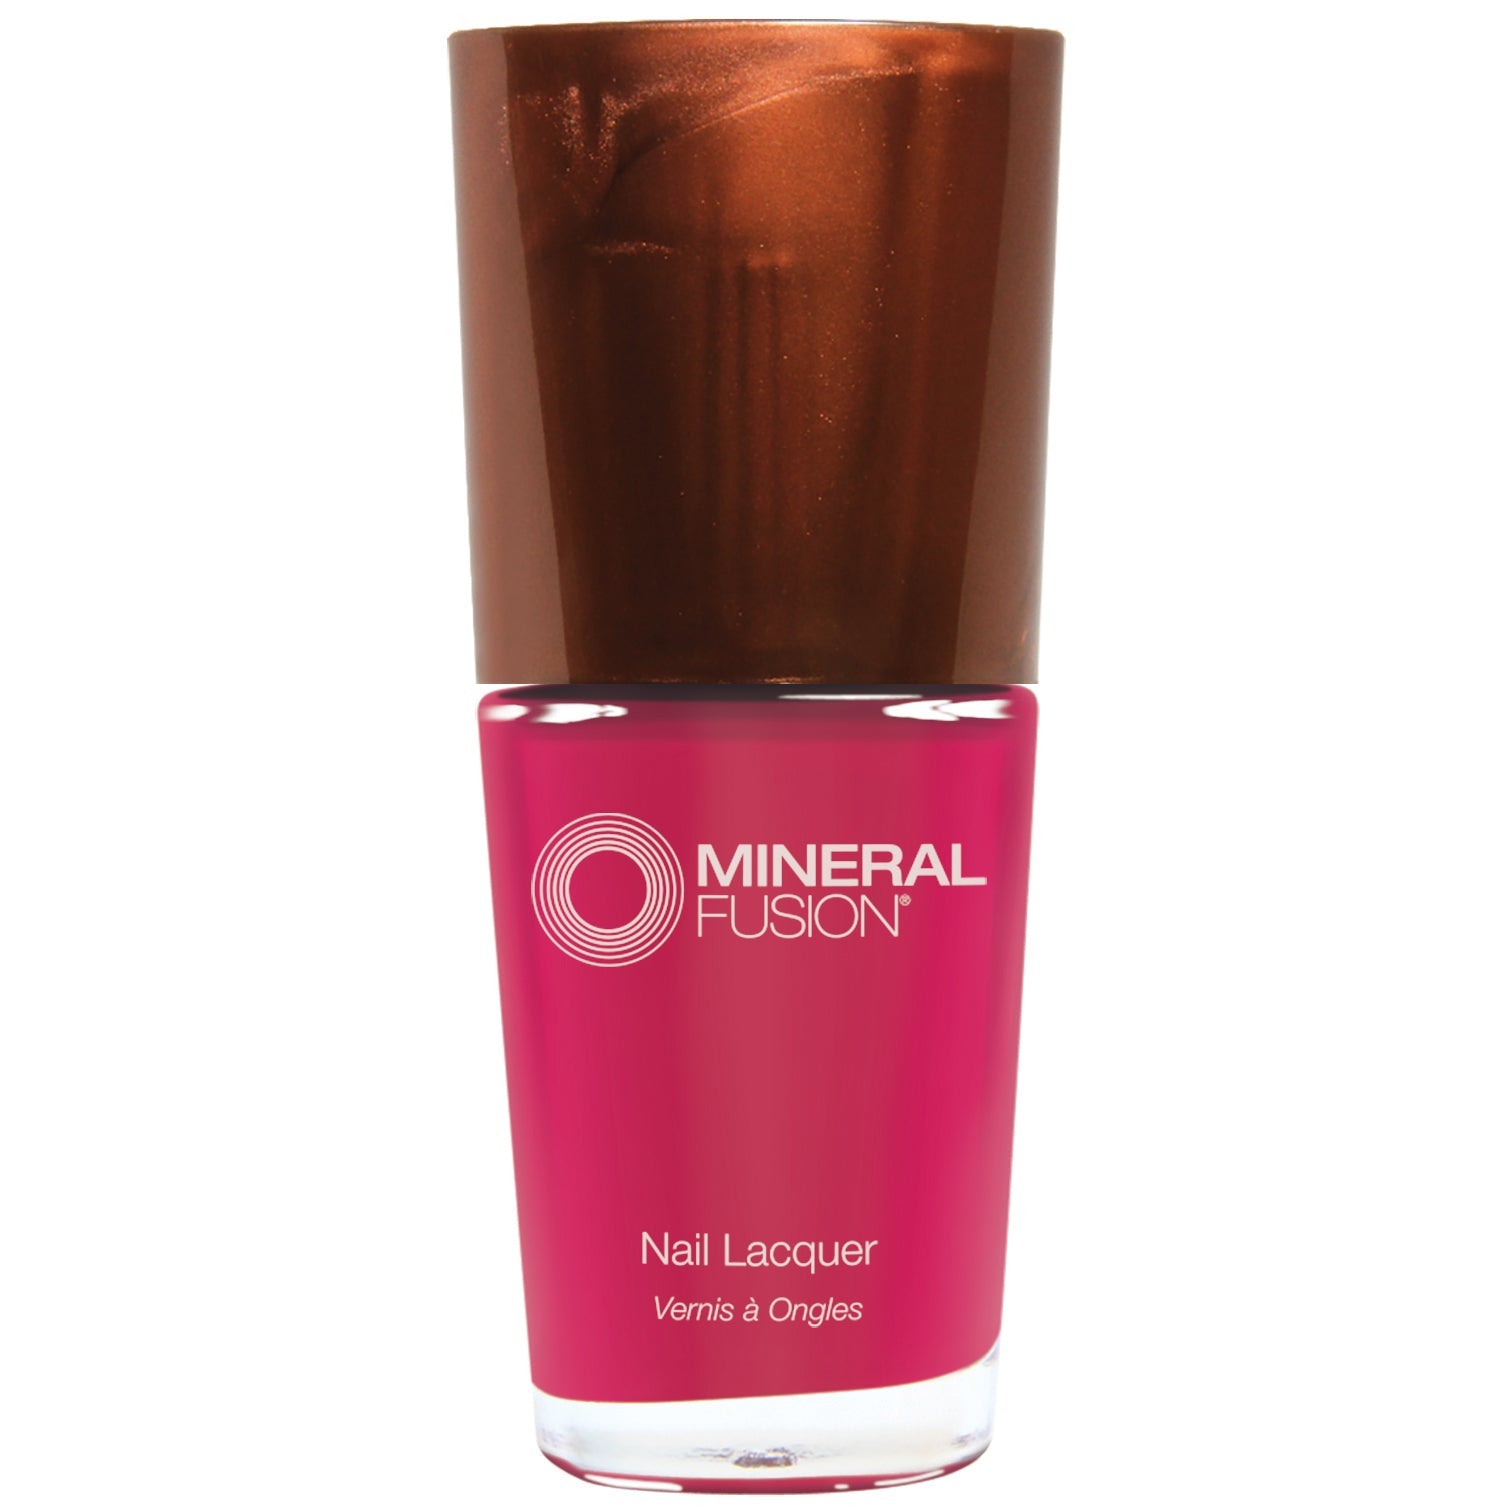 Mineral Fusion - Nail Polish - Rock Candy - by Mineral Fusion |ProCare Outlet|